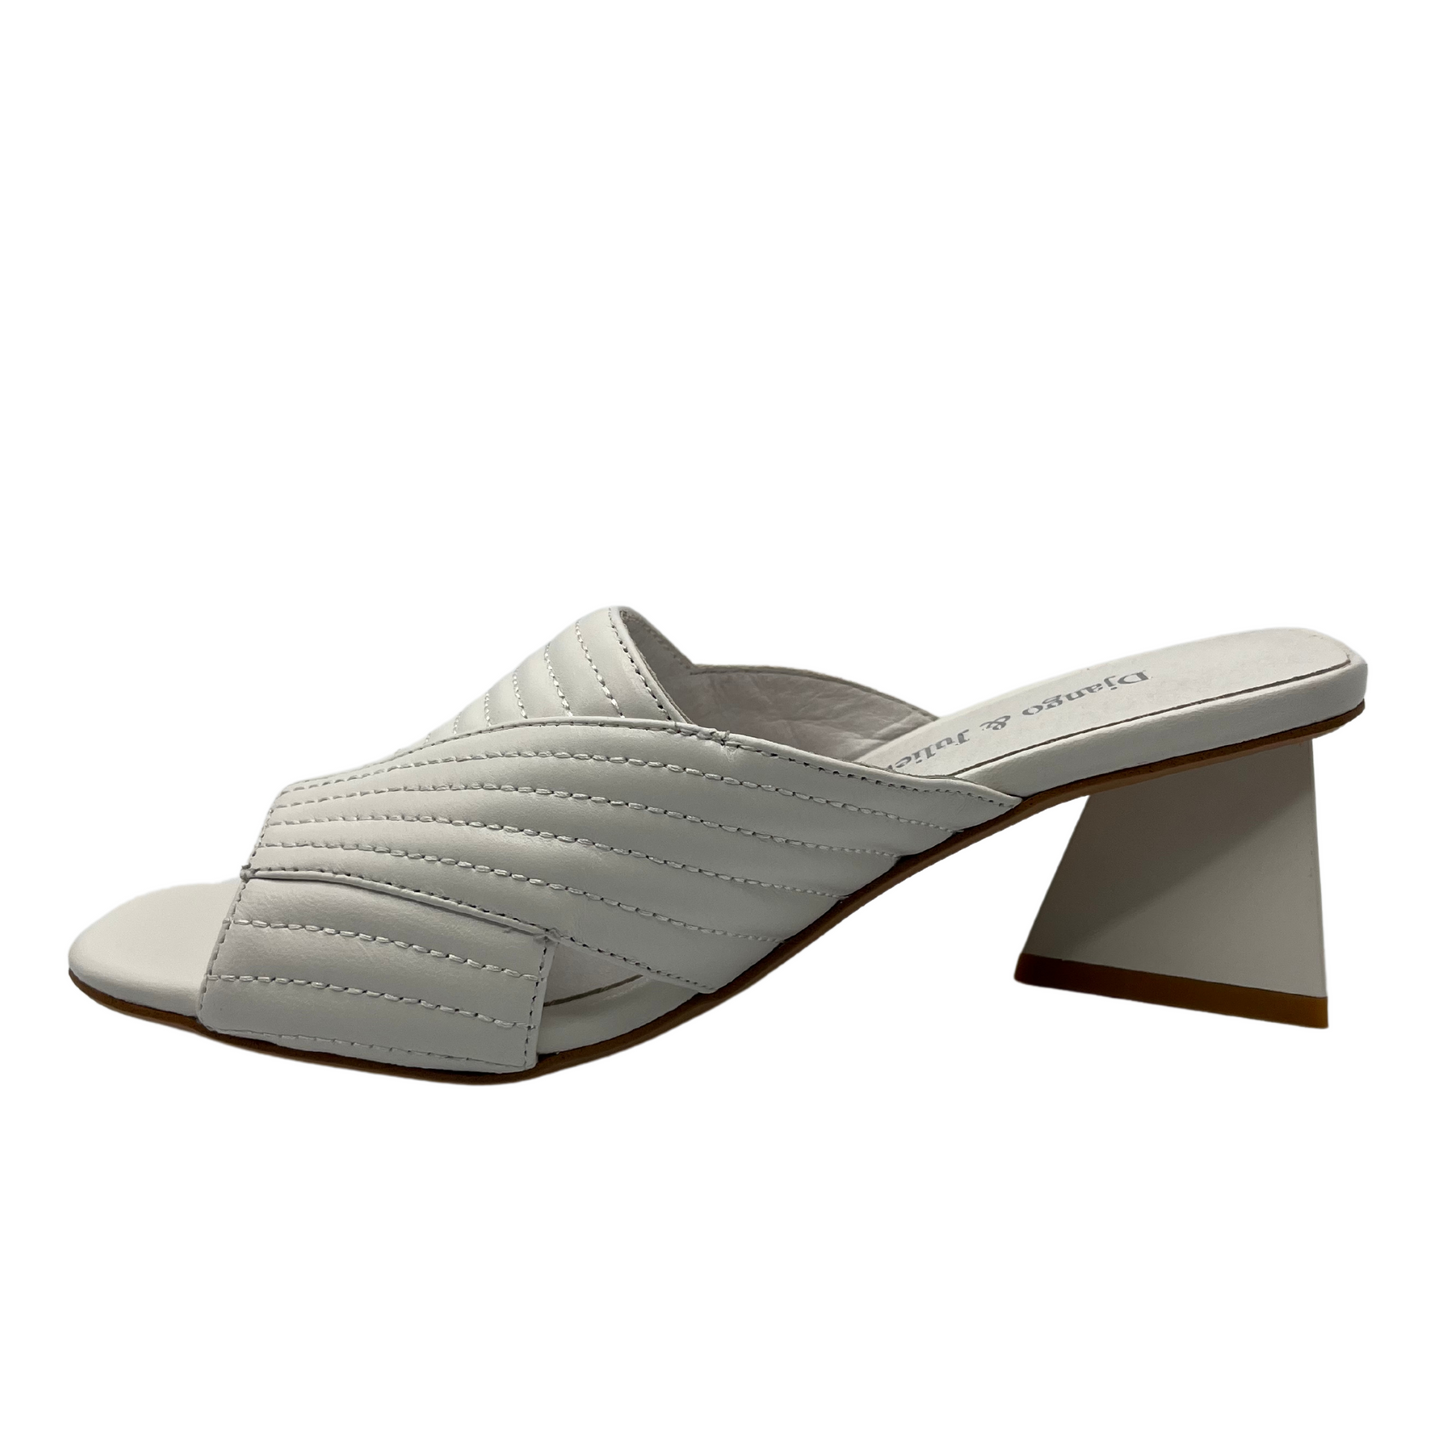 Left facing view of white leather sandal with triangular heel and quilted style upper